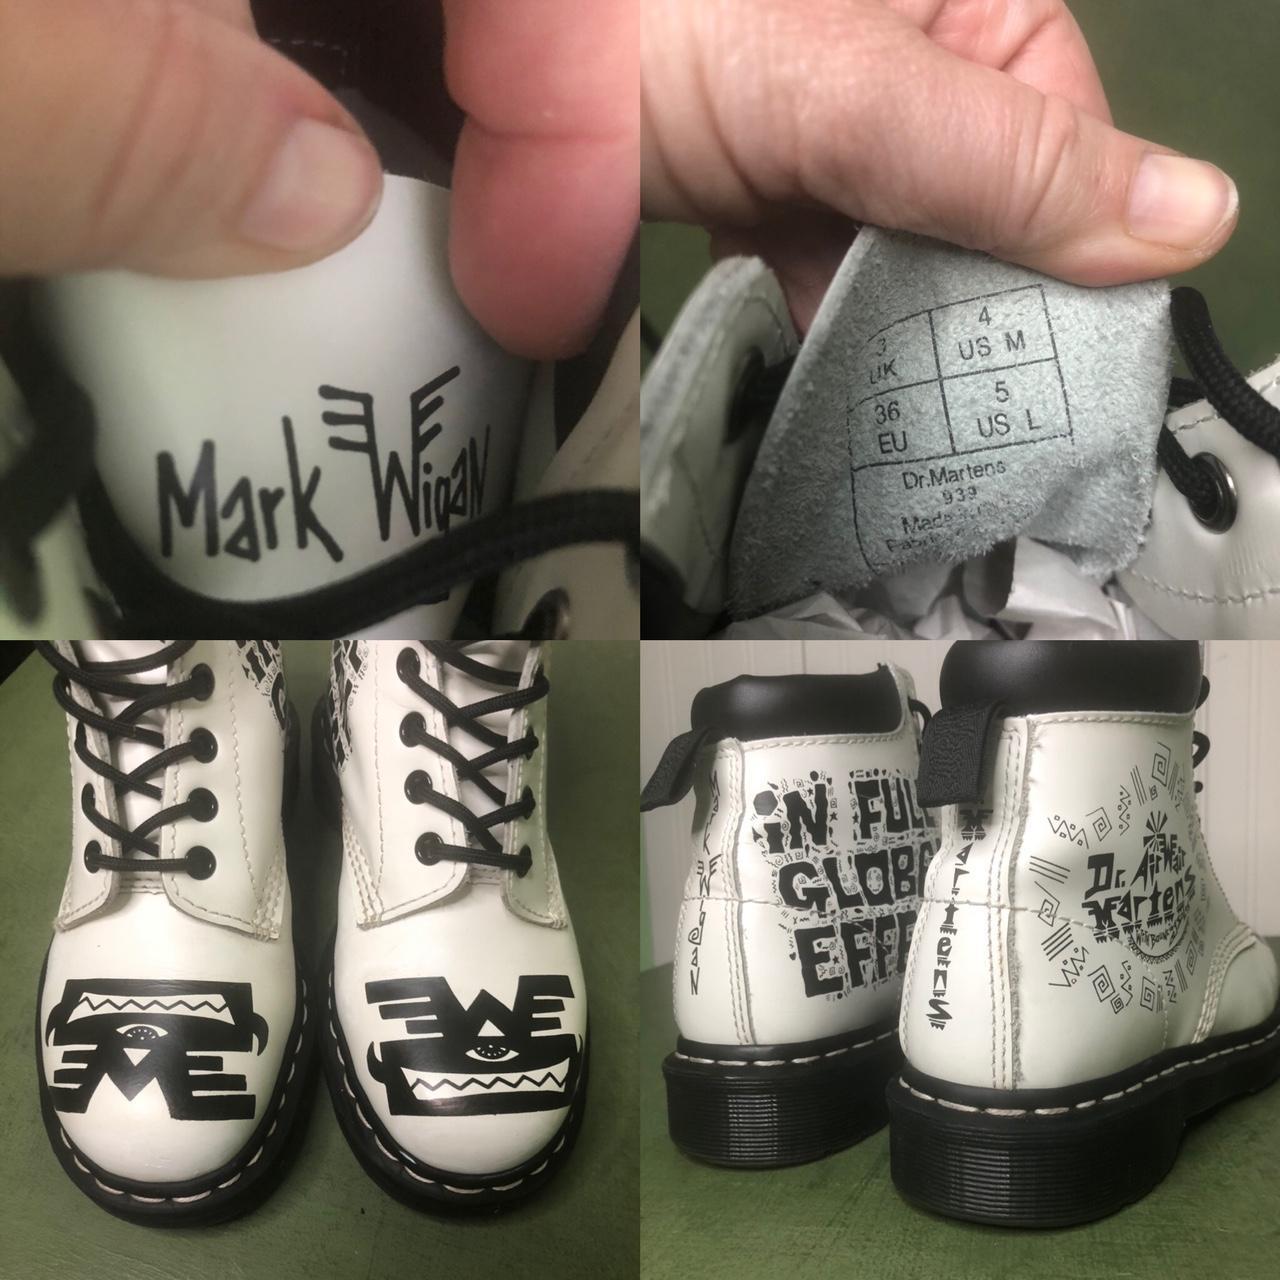 Dr Martens limited edition collab with Mark Wigan,